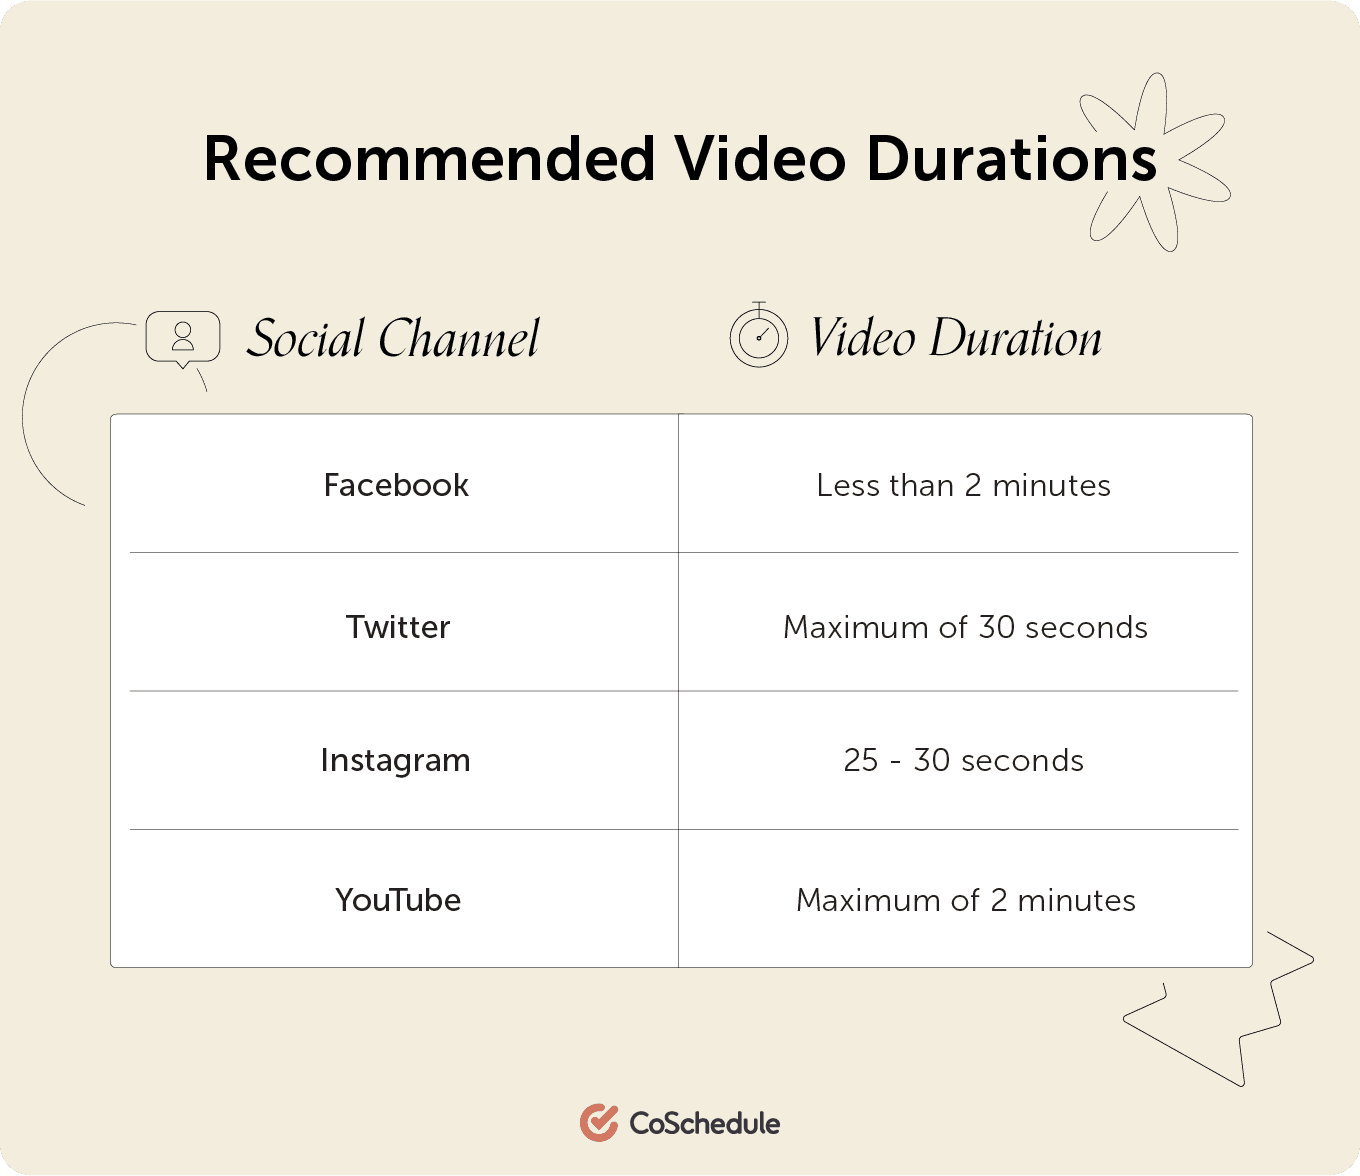 recommended video durations for various social media platforms